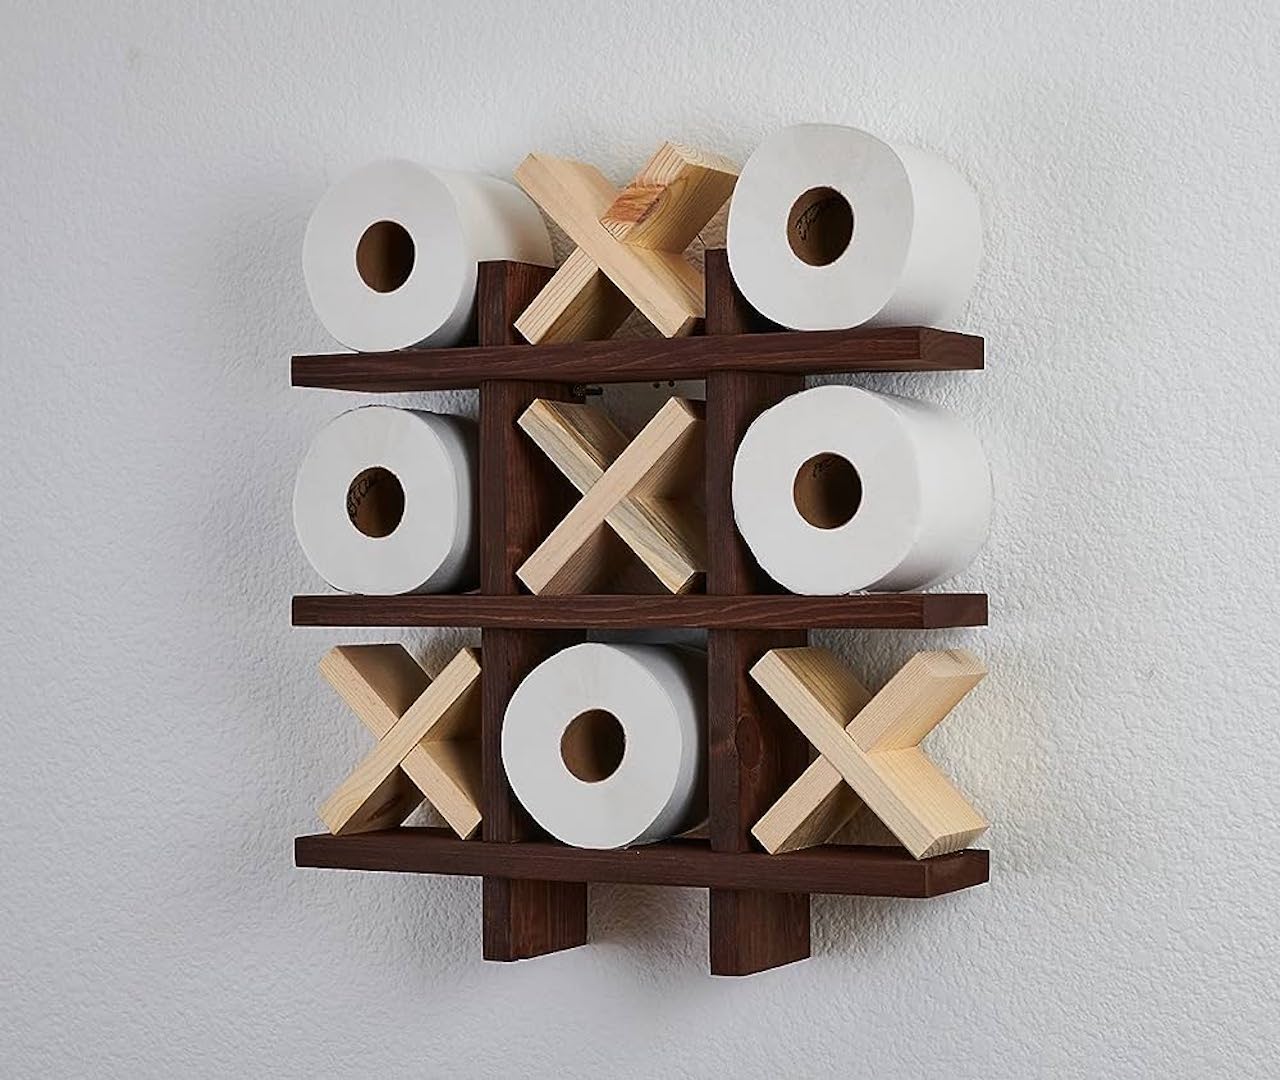 How To Make A Tic Tac Toe Toilet Paper Holder